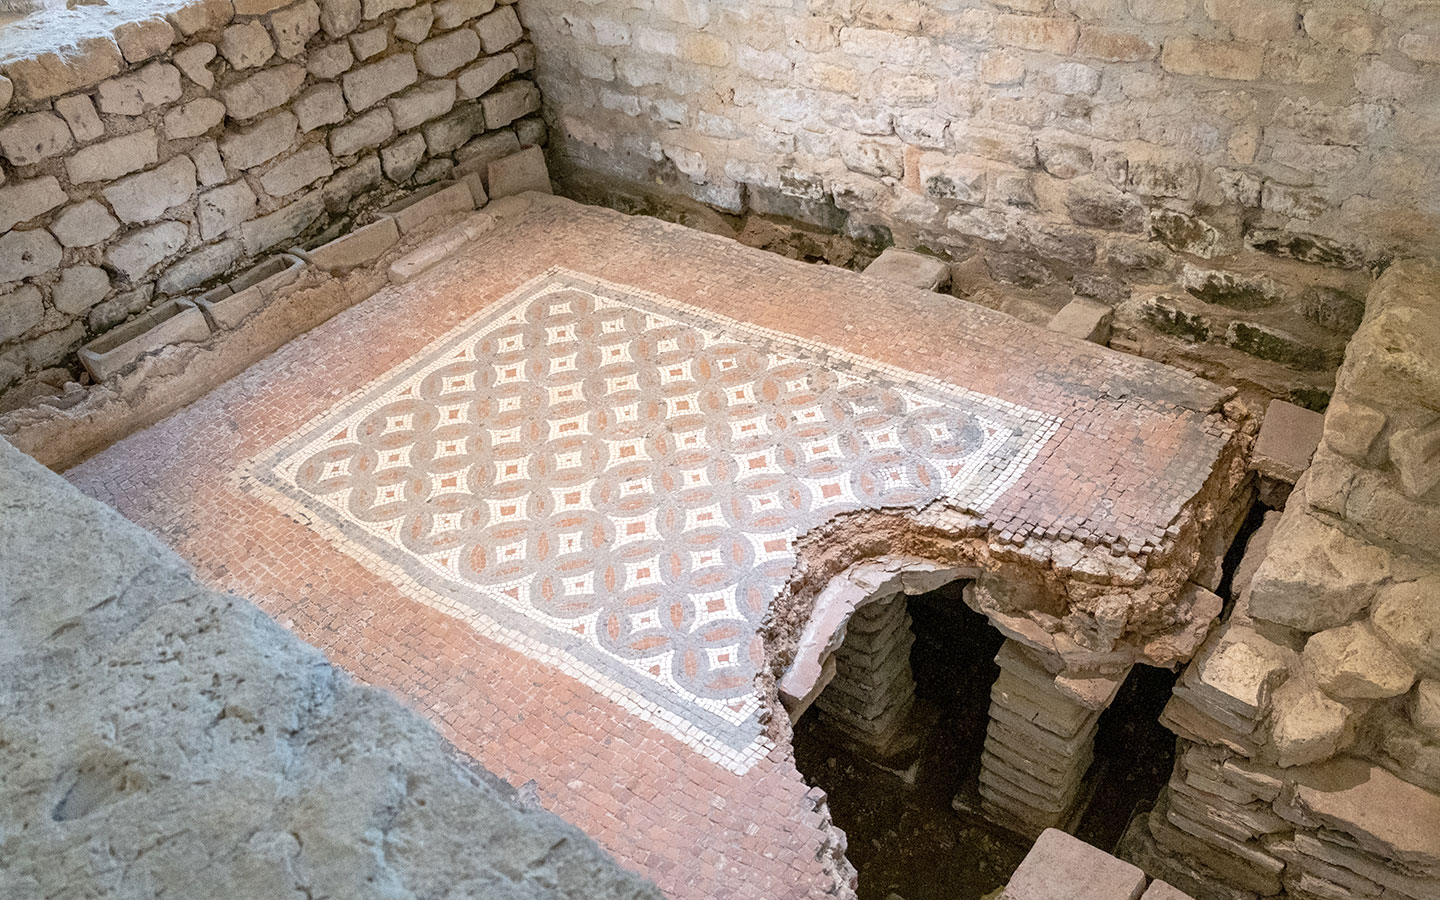 The hypocaust beneath the mosaics in Roman bathhouse at Chedworth